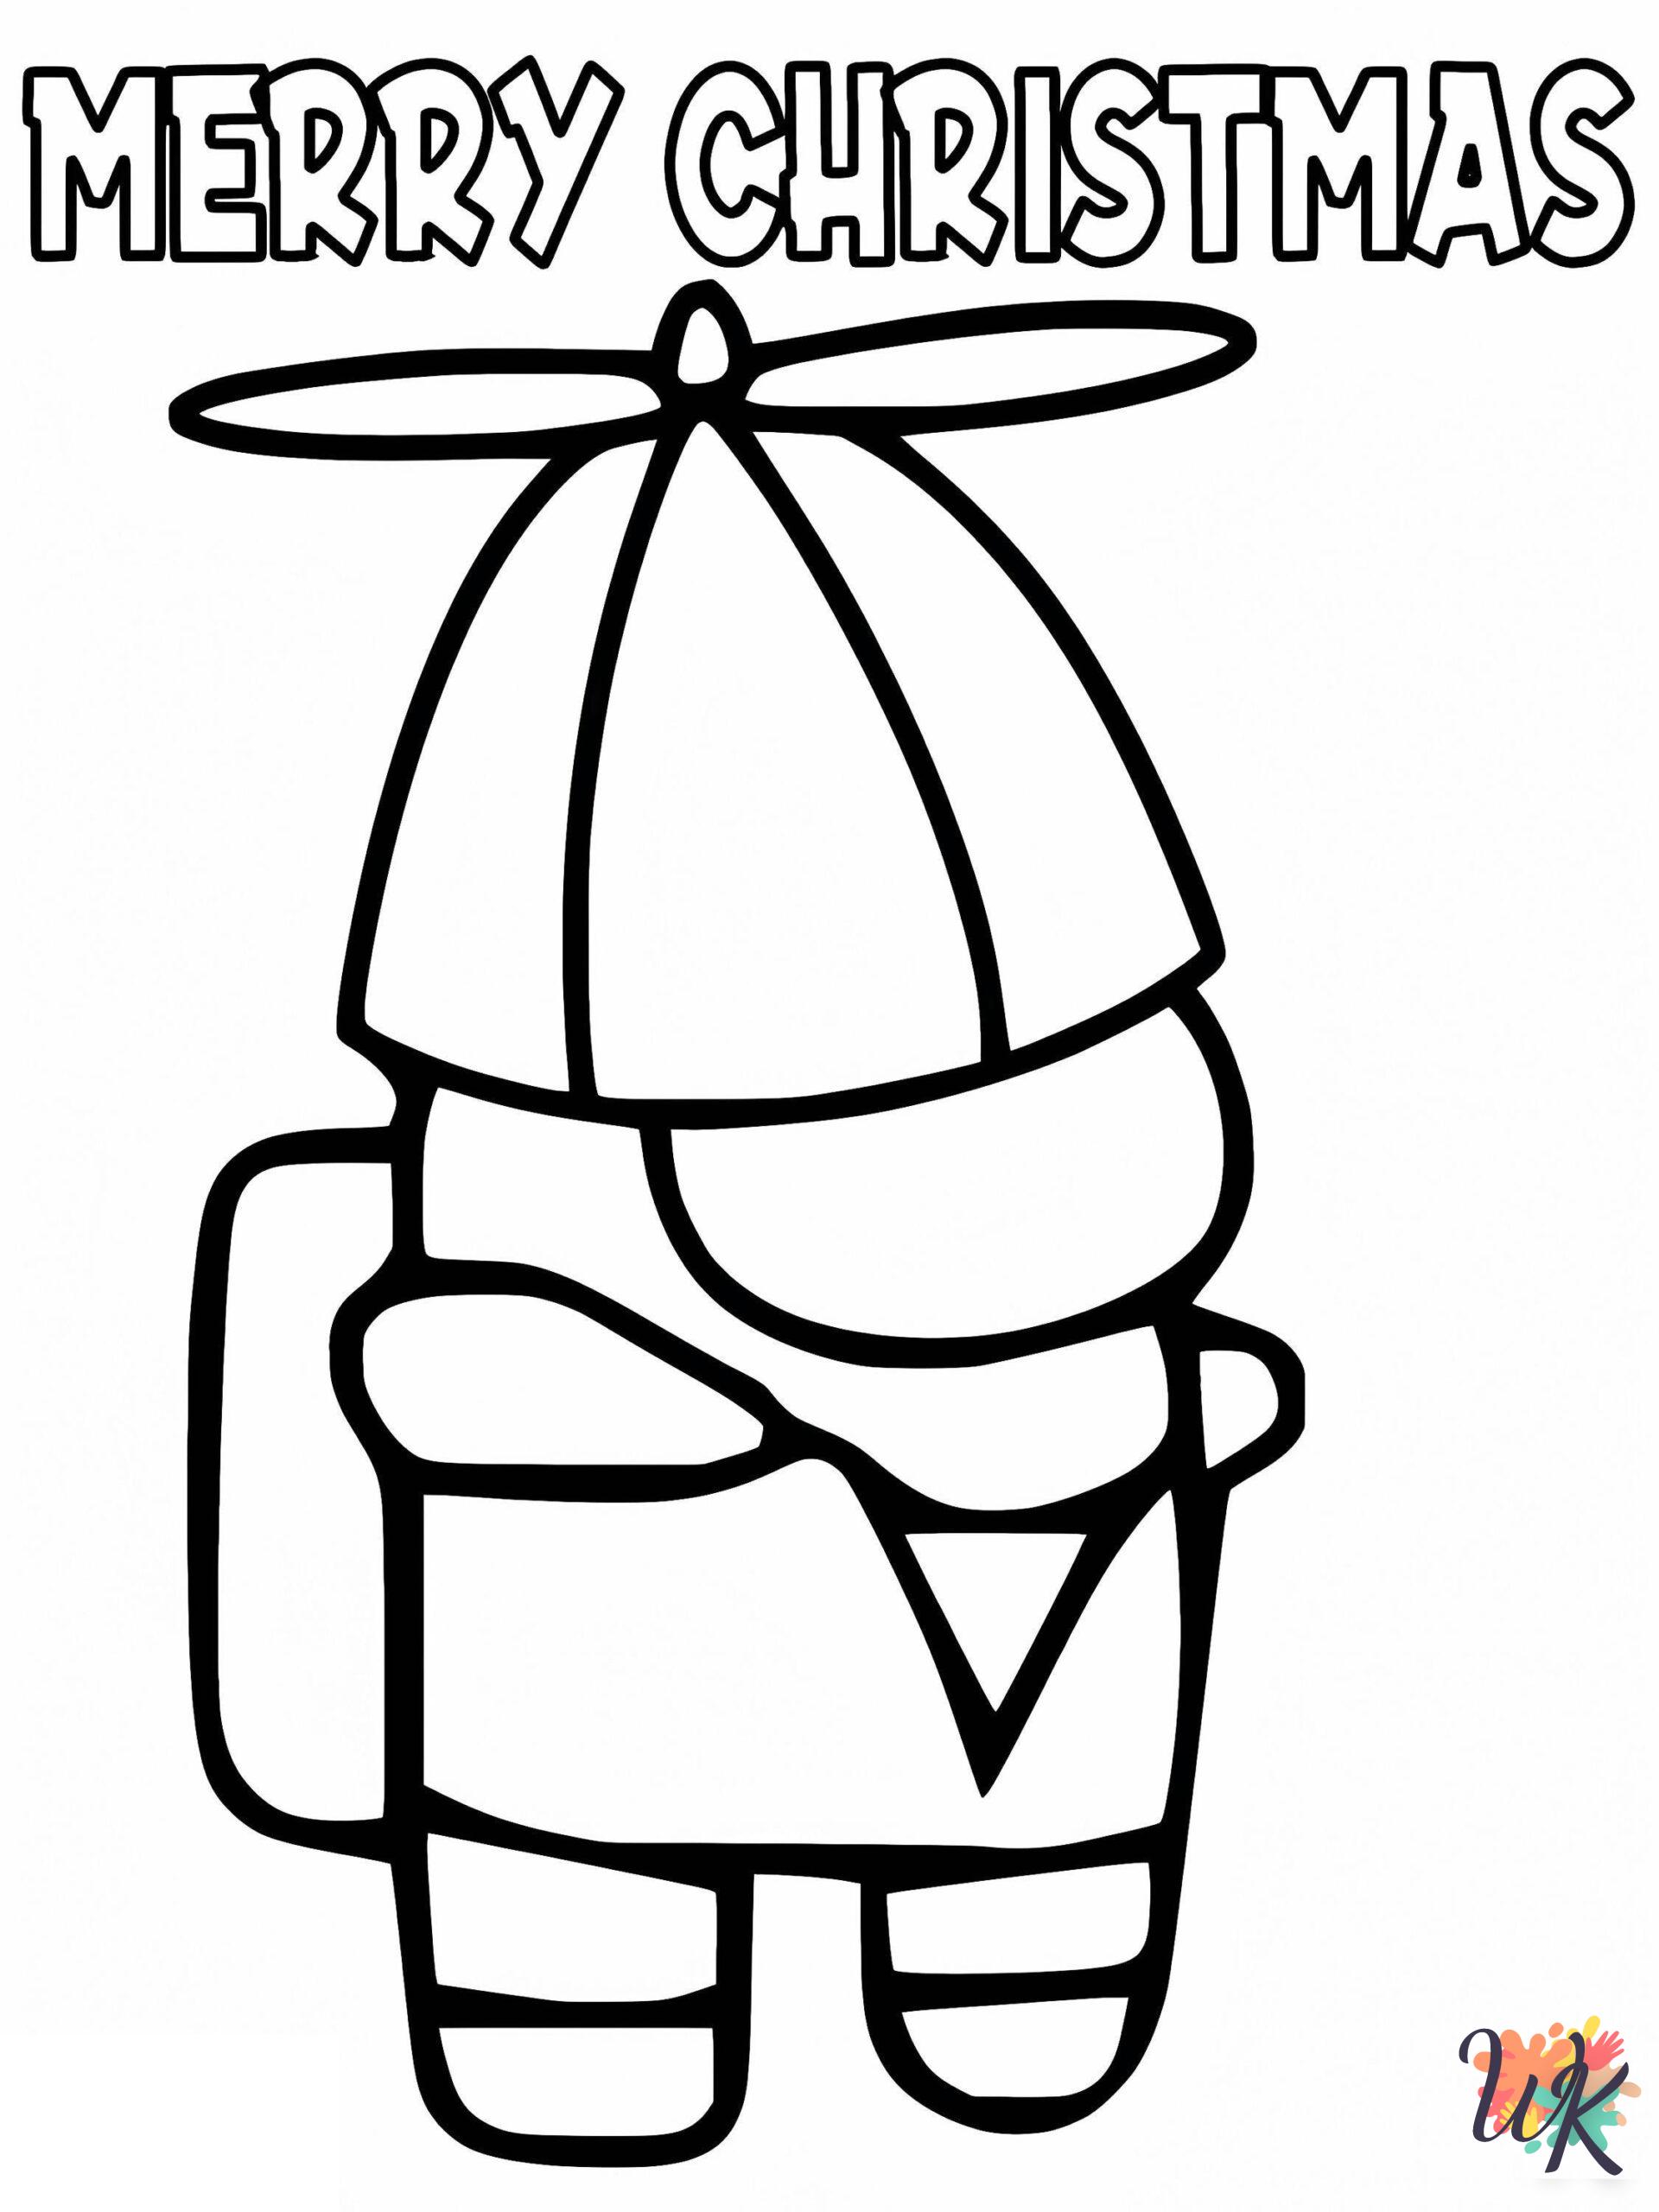 free Among Us Christmas tree coloring pages